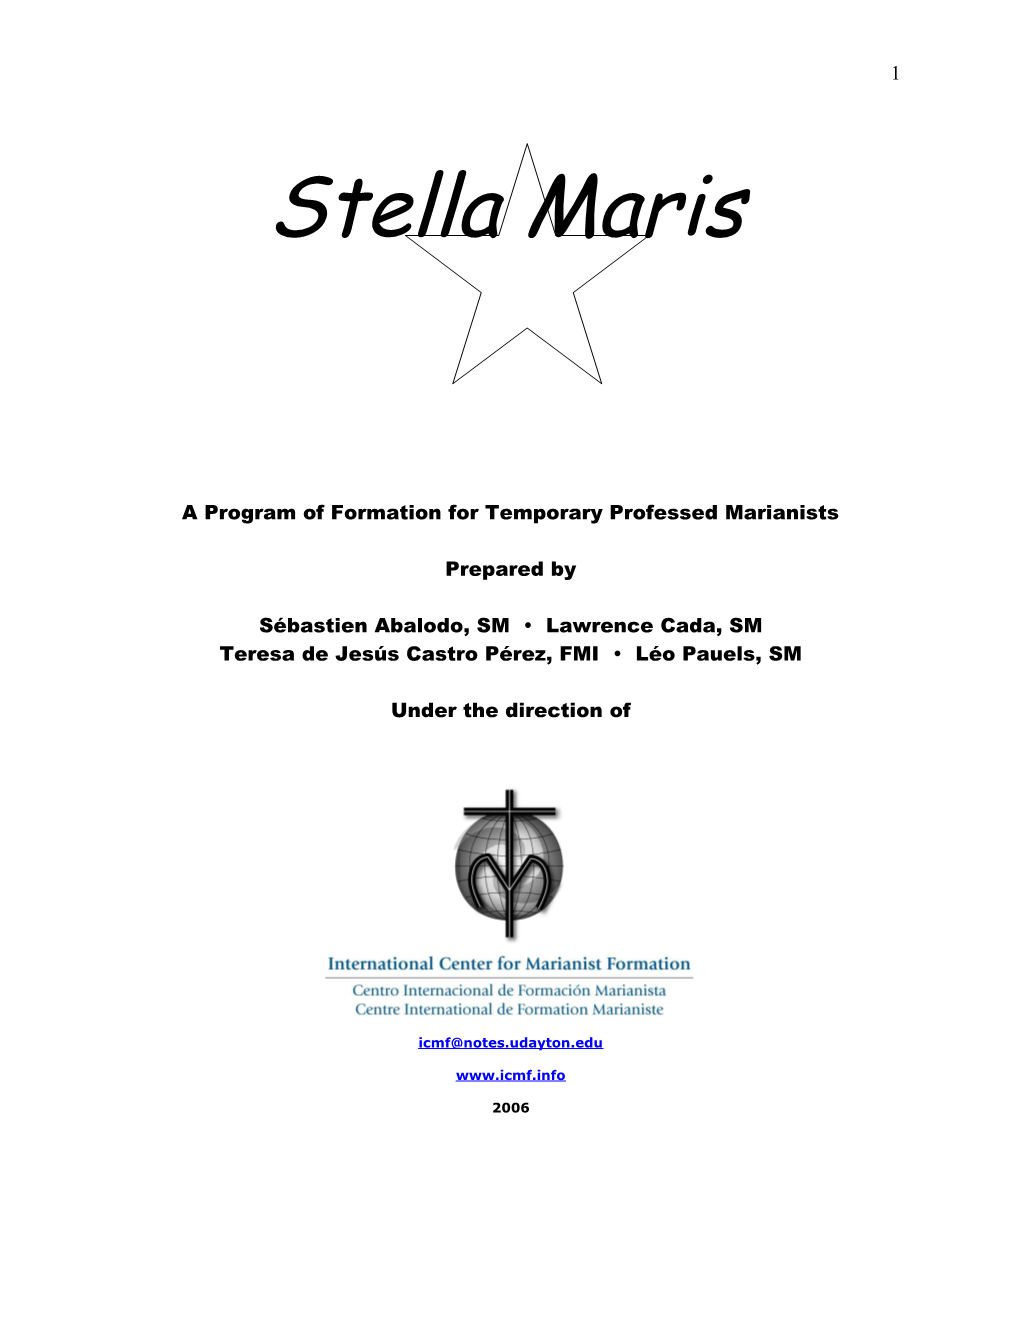 A Program of Formation for Temporary Professed Marianists